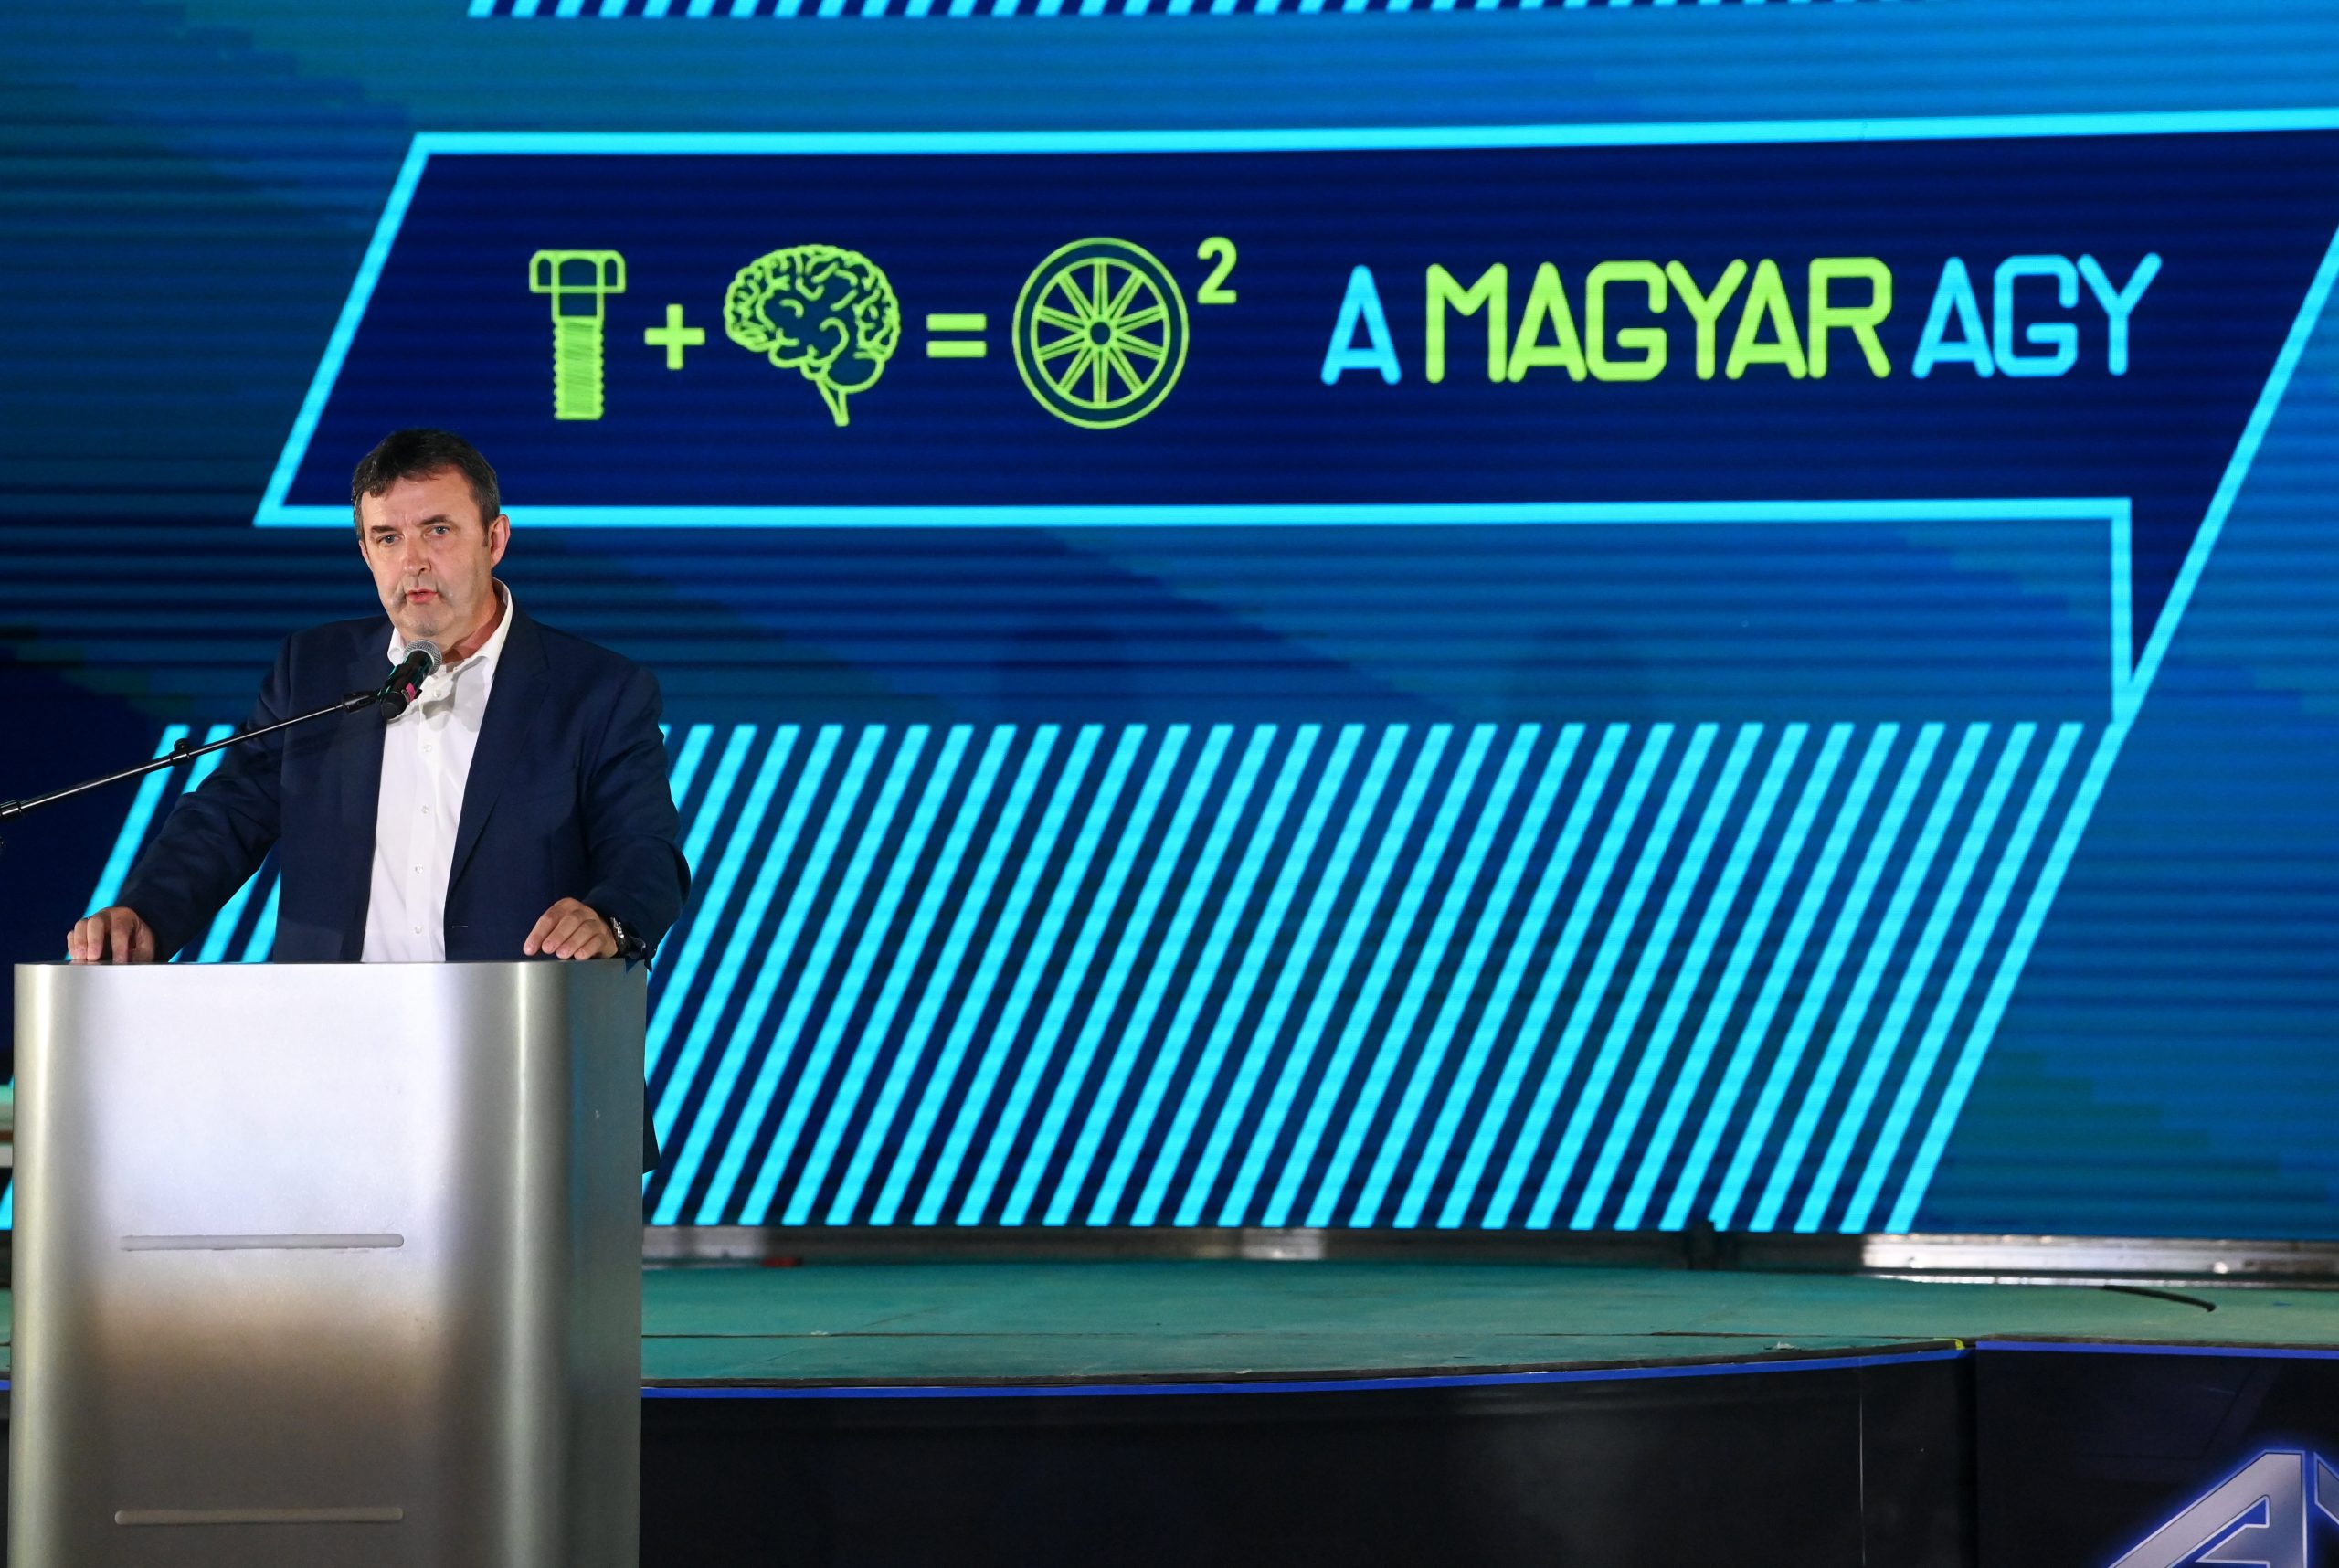 Technology Minister Palkovics Opens Intl Automobile and Tuning Show